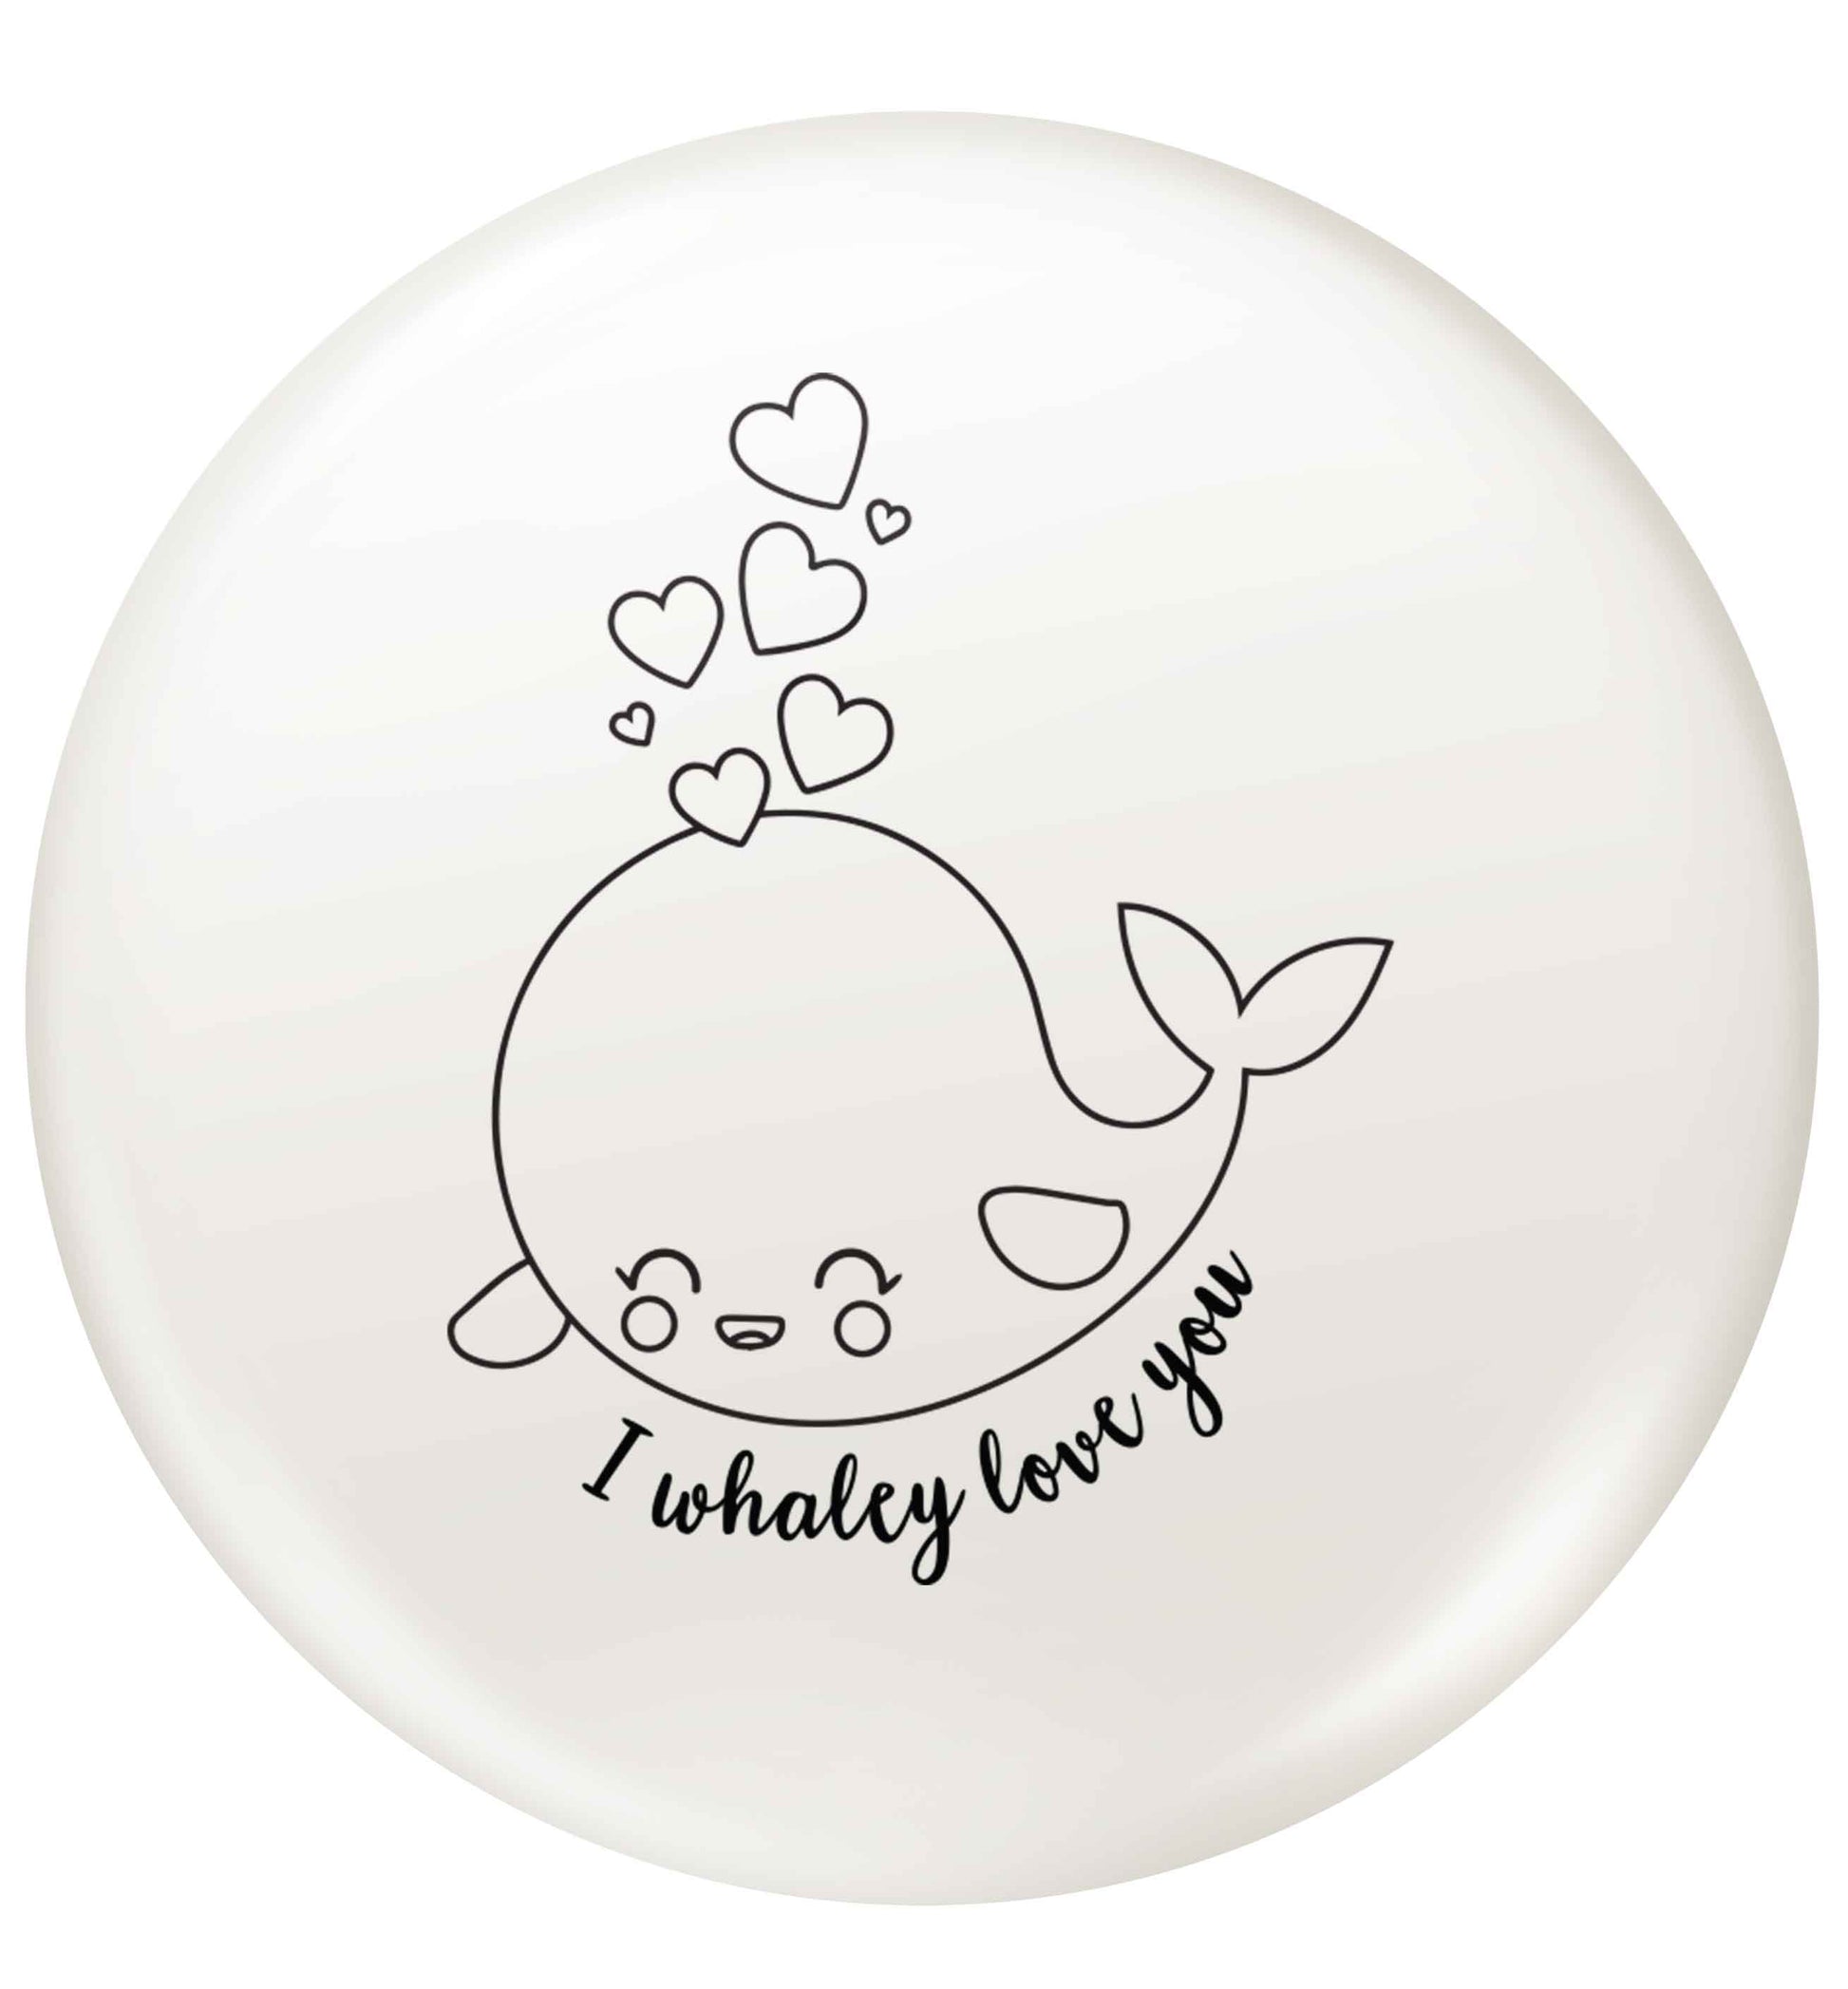 I whaley love you small 25mm Pin badge